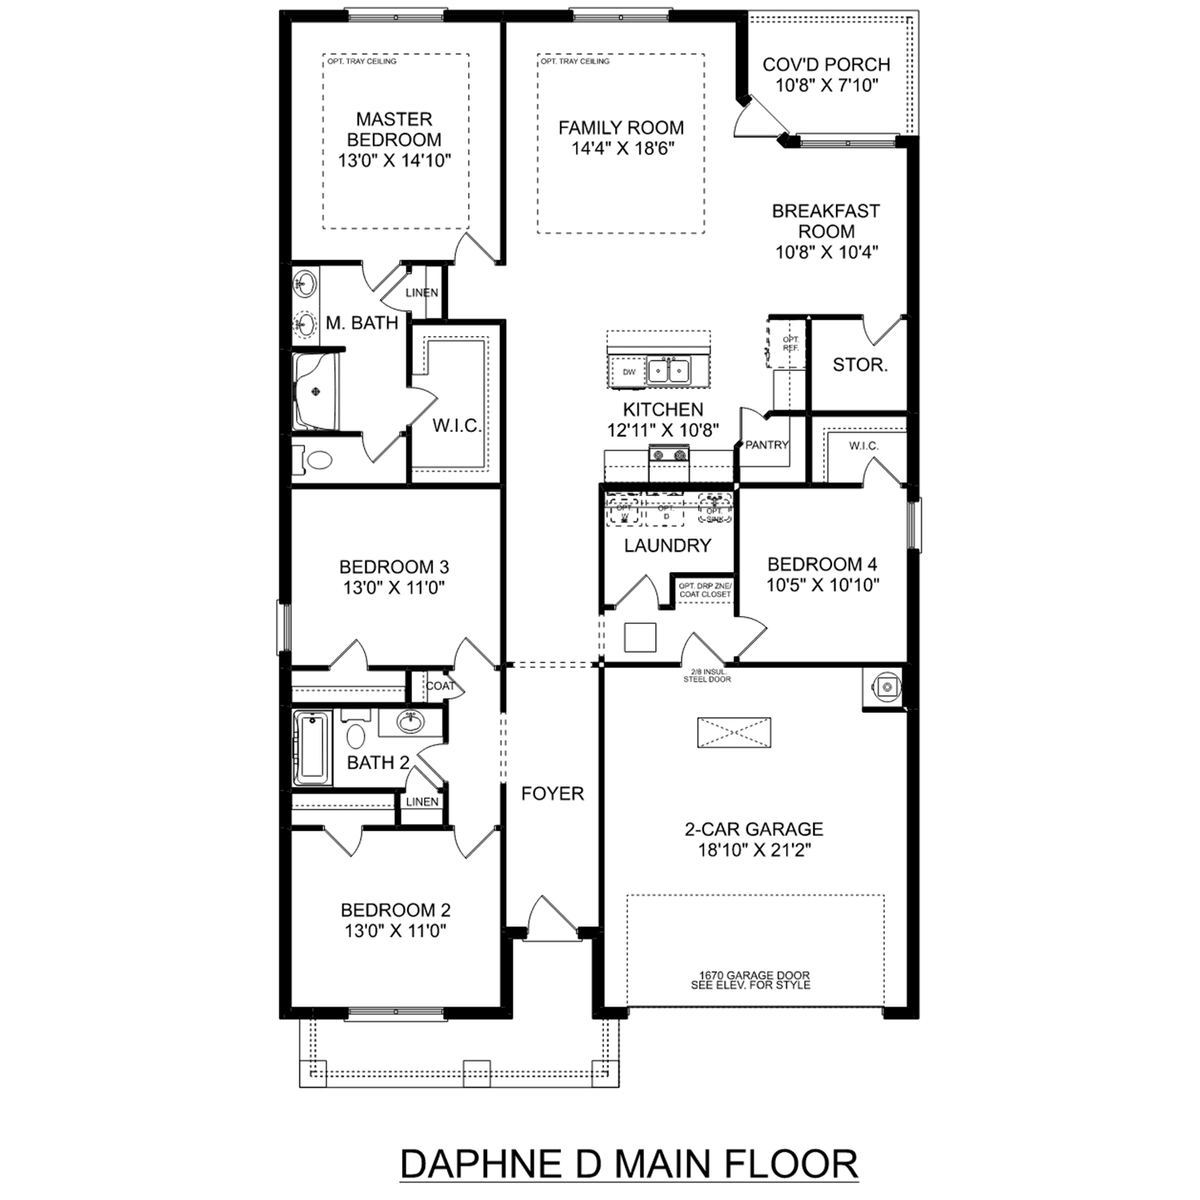 1 - The Daphne D floor plan layout for 9224 Current Way in Davidson Homes' Watts Glen community.